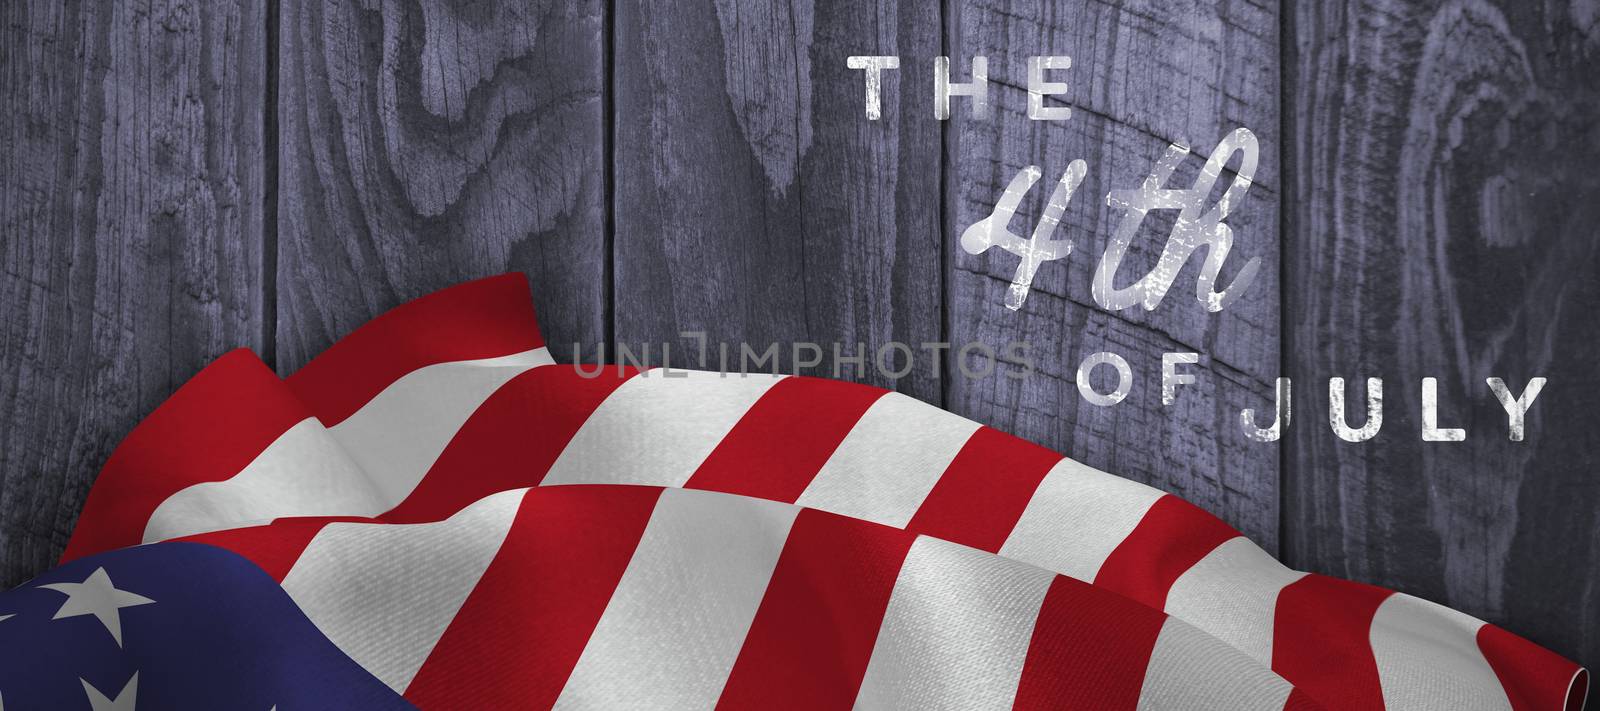 Colorful happy 4th of july text against white background against wood panelling